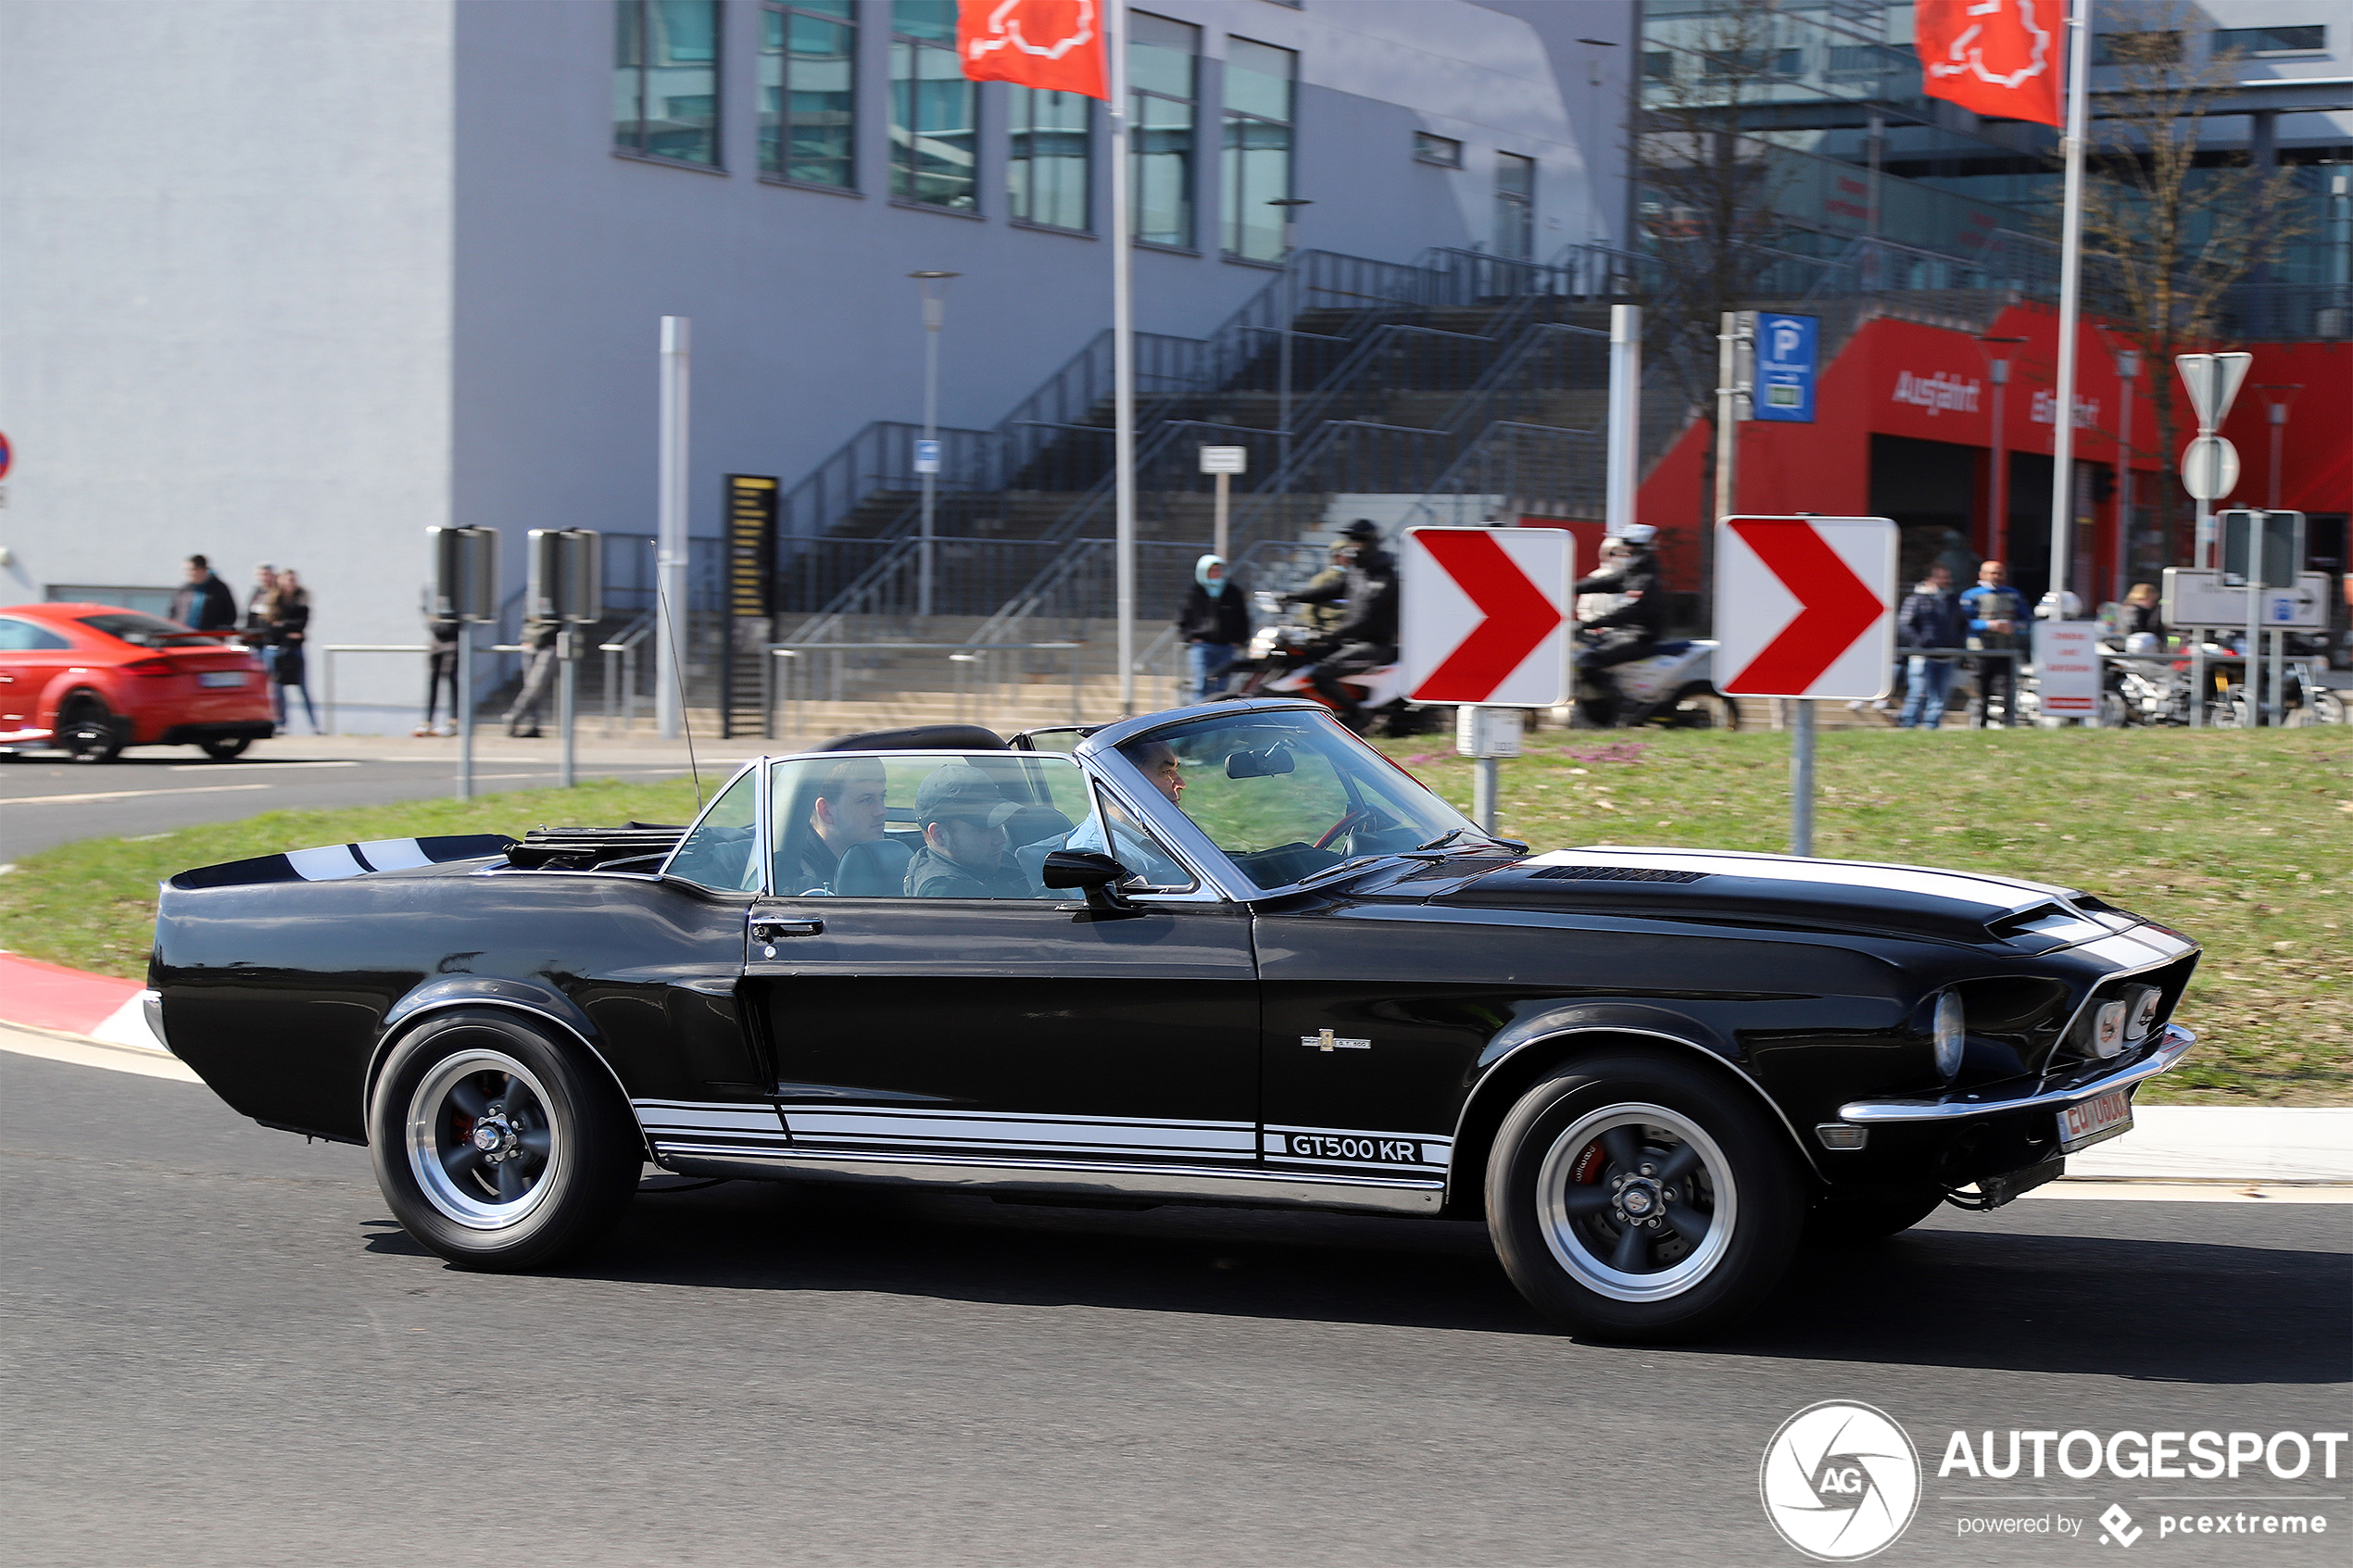 Ford Mustang Shelby G.T. 500 KR Cabriolet